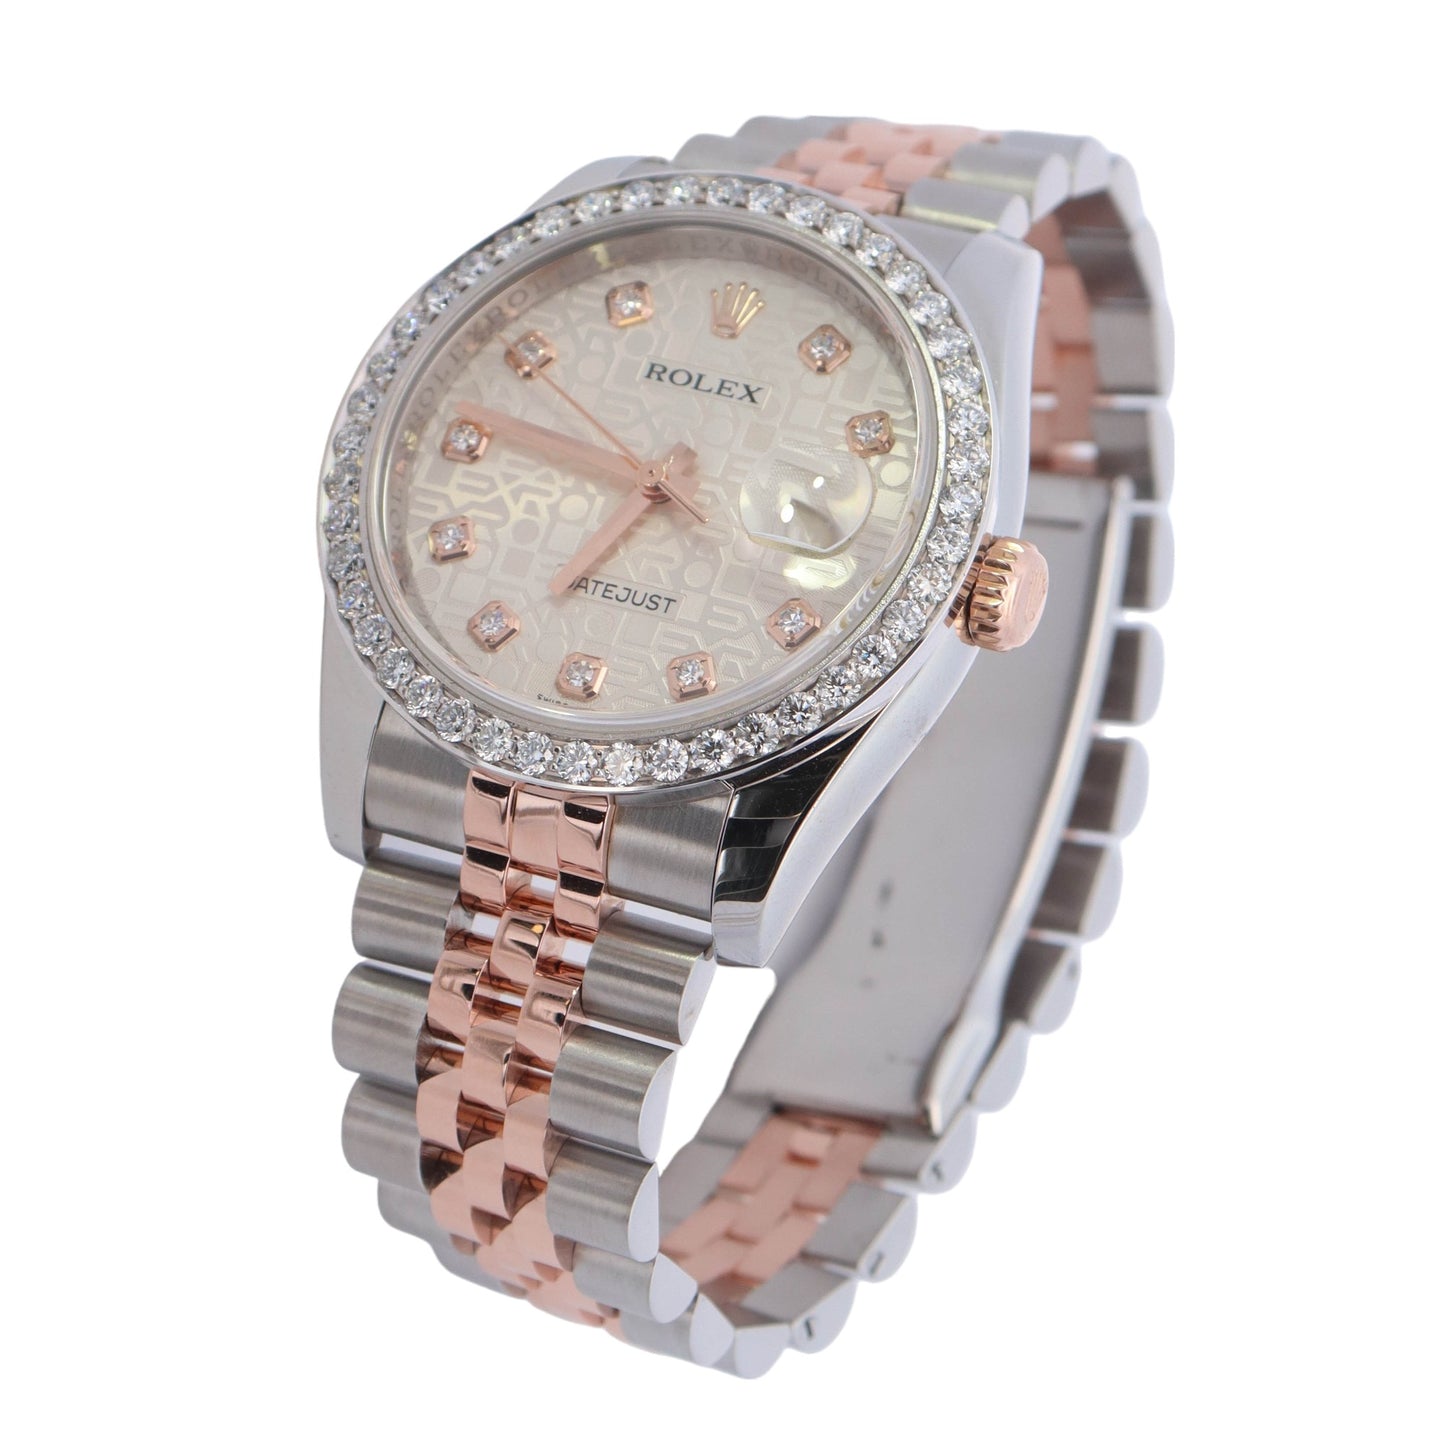 Rolex Datejust Two-Tone Rose Gold & Stainless Steel 36mm Ivory Jubilee Diamond Dot Dial Watch Ref#  116231